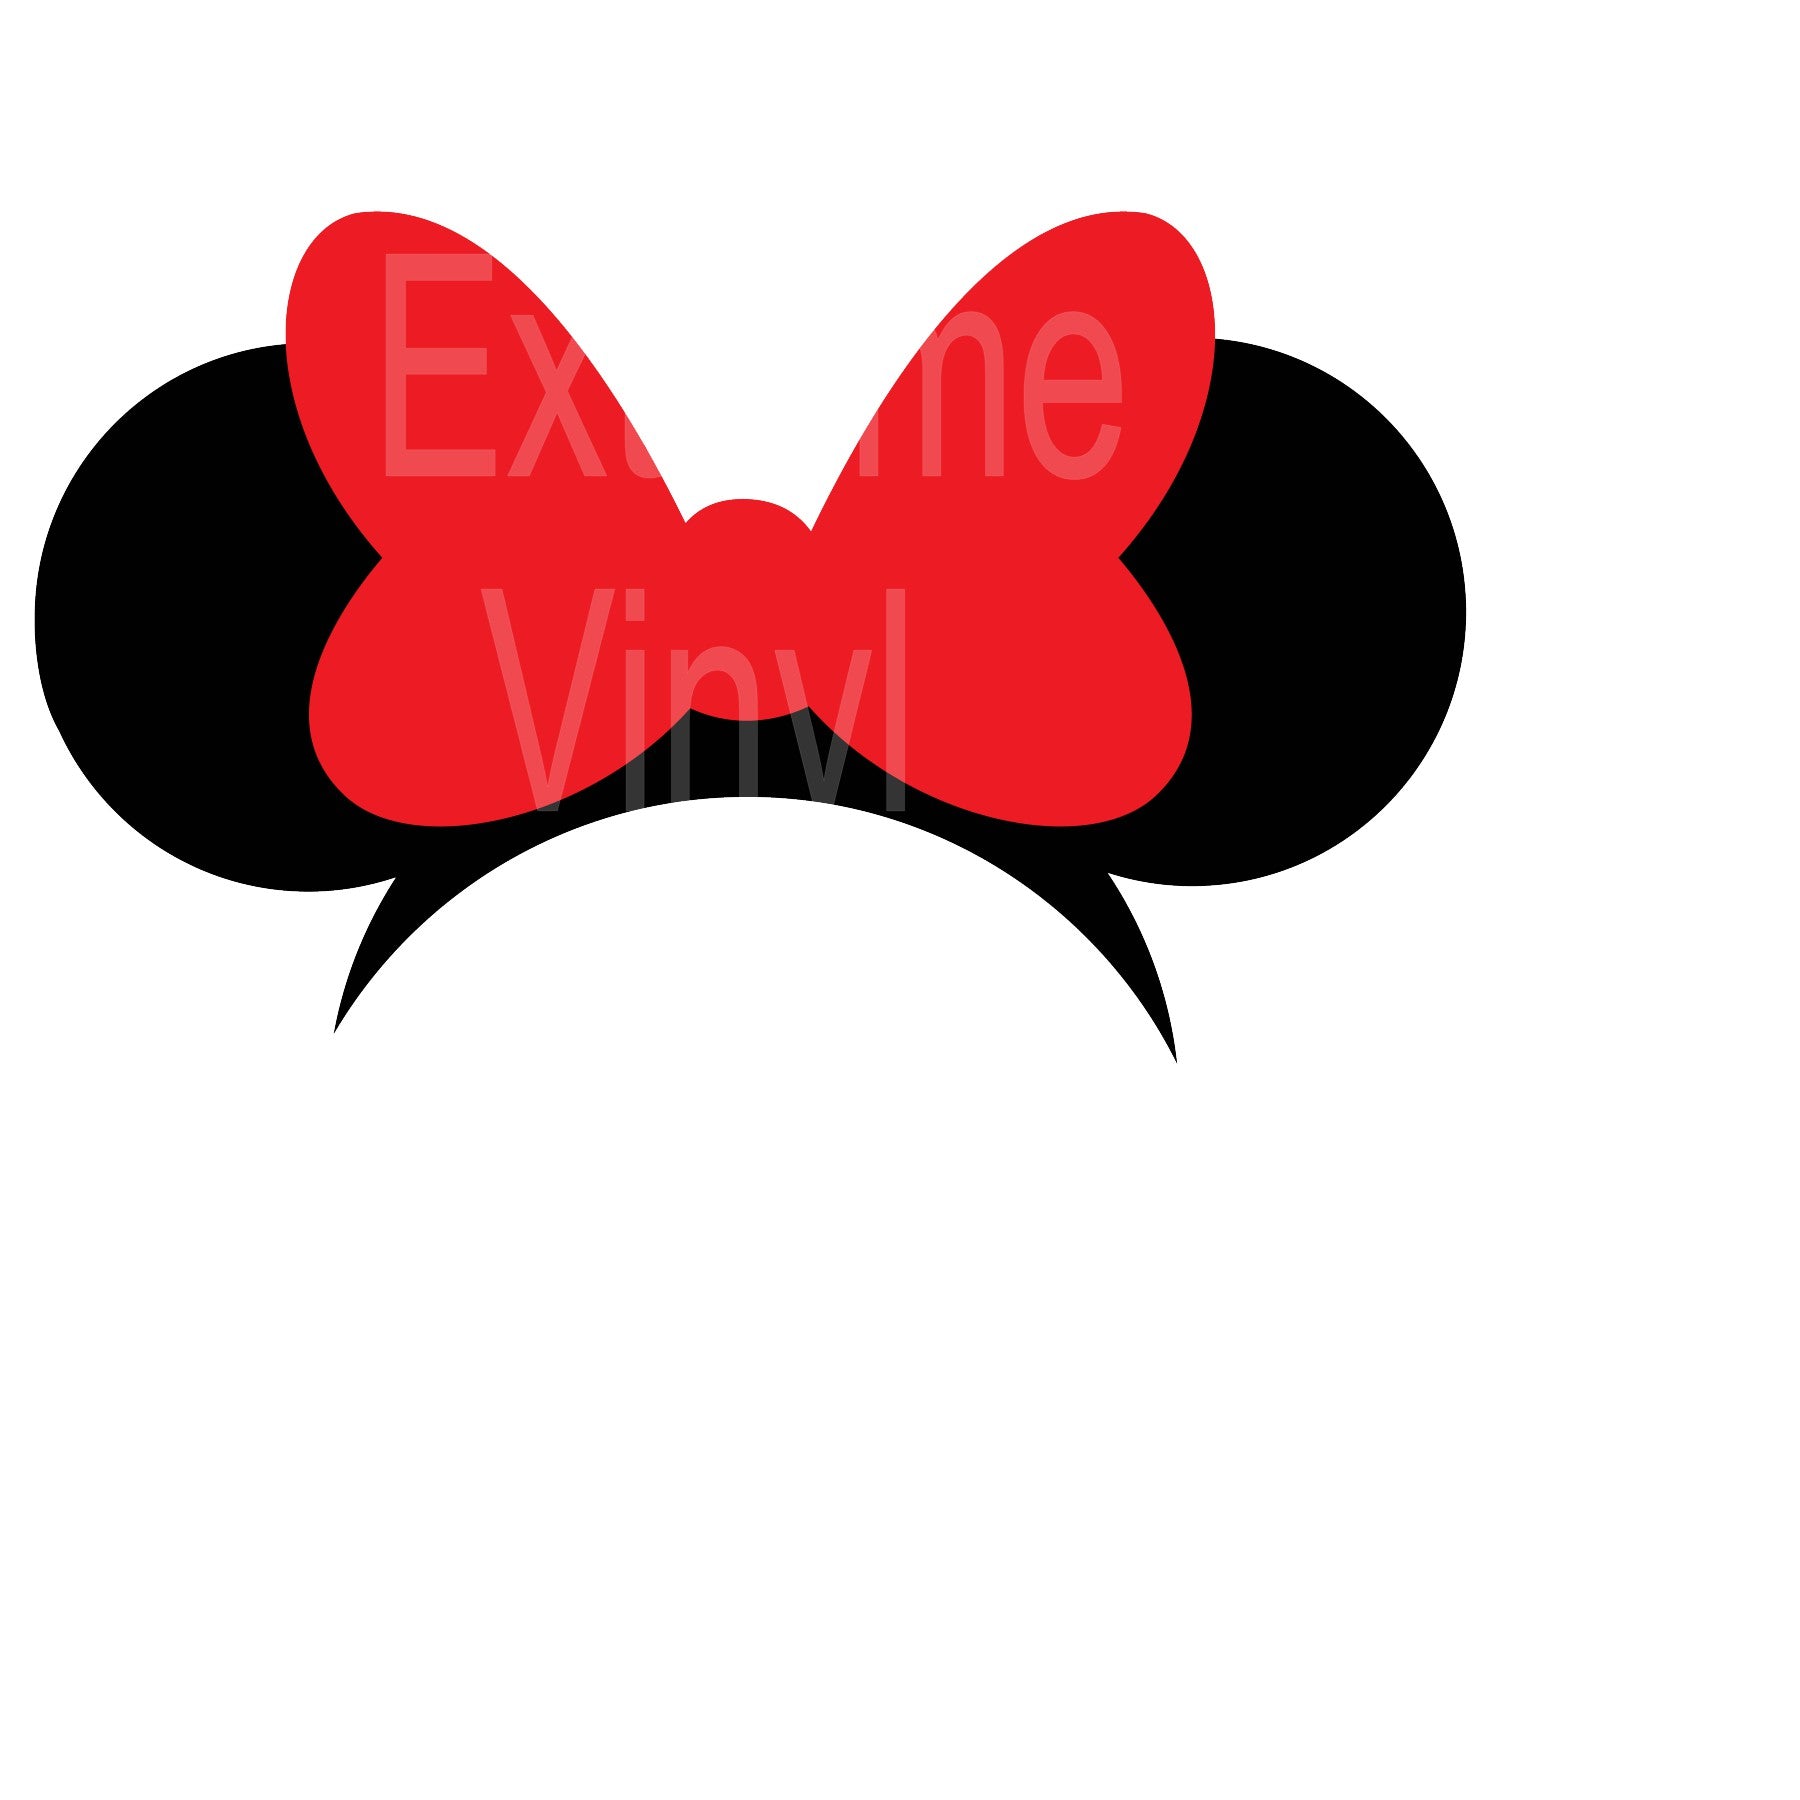 THE ORIGINAL Pin Trading Cork board Mouse Ears – Best Day Ever Ears Co.